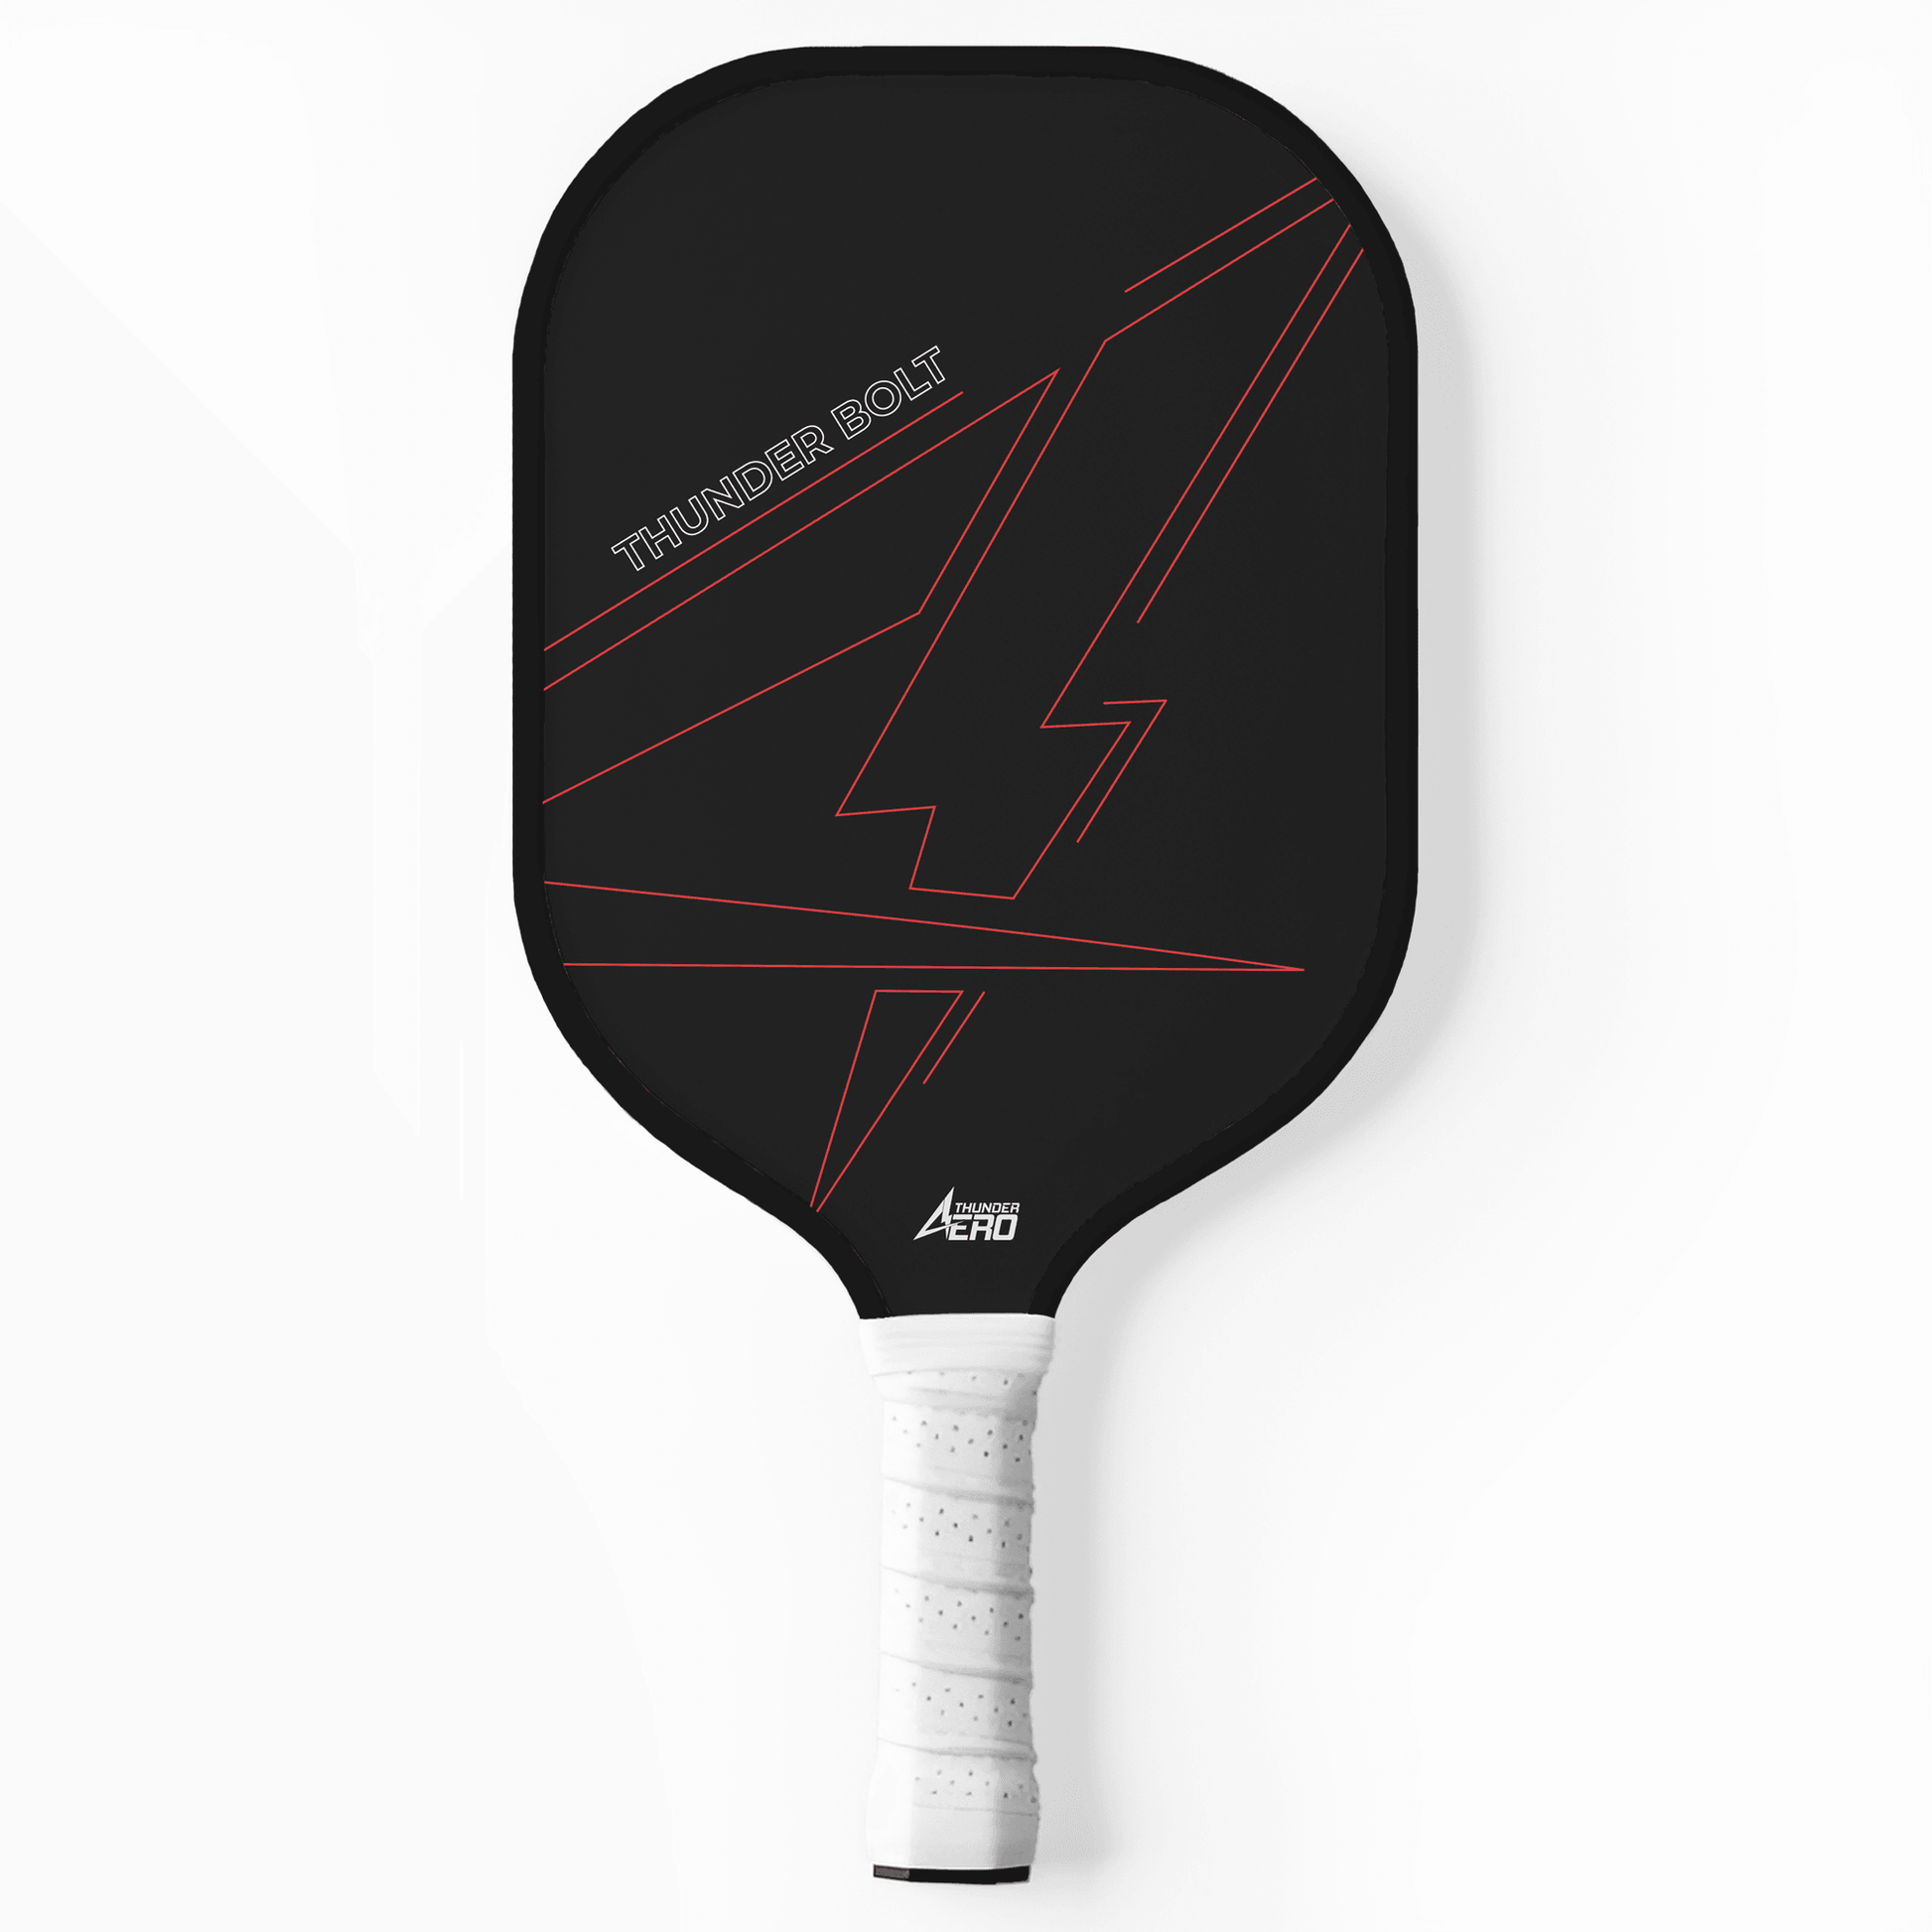 Epic drive Edition Best Professional Pickleball Paddle Brand AT-2000 Red - Aero Thunder